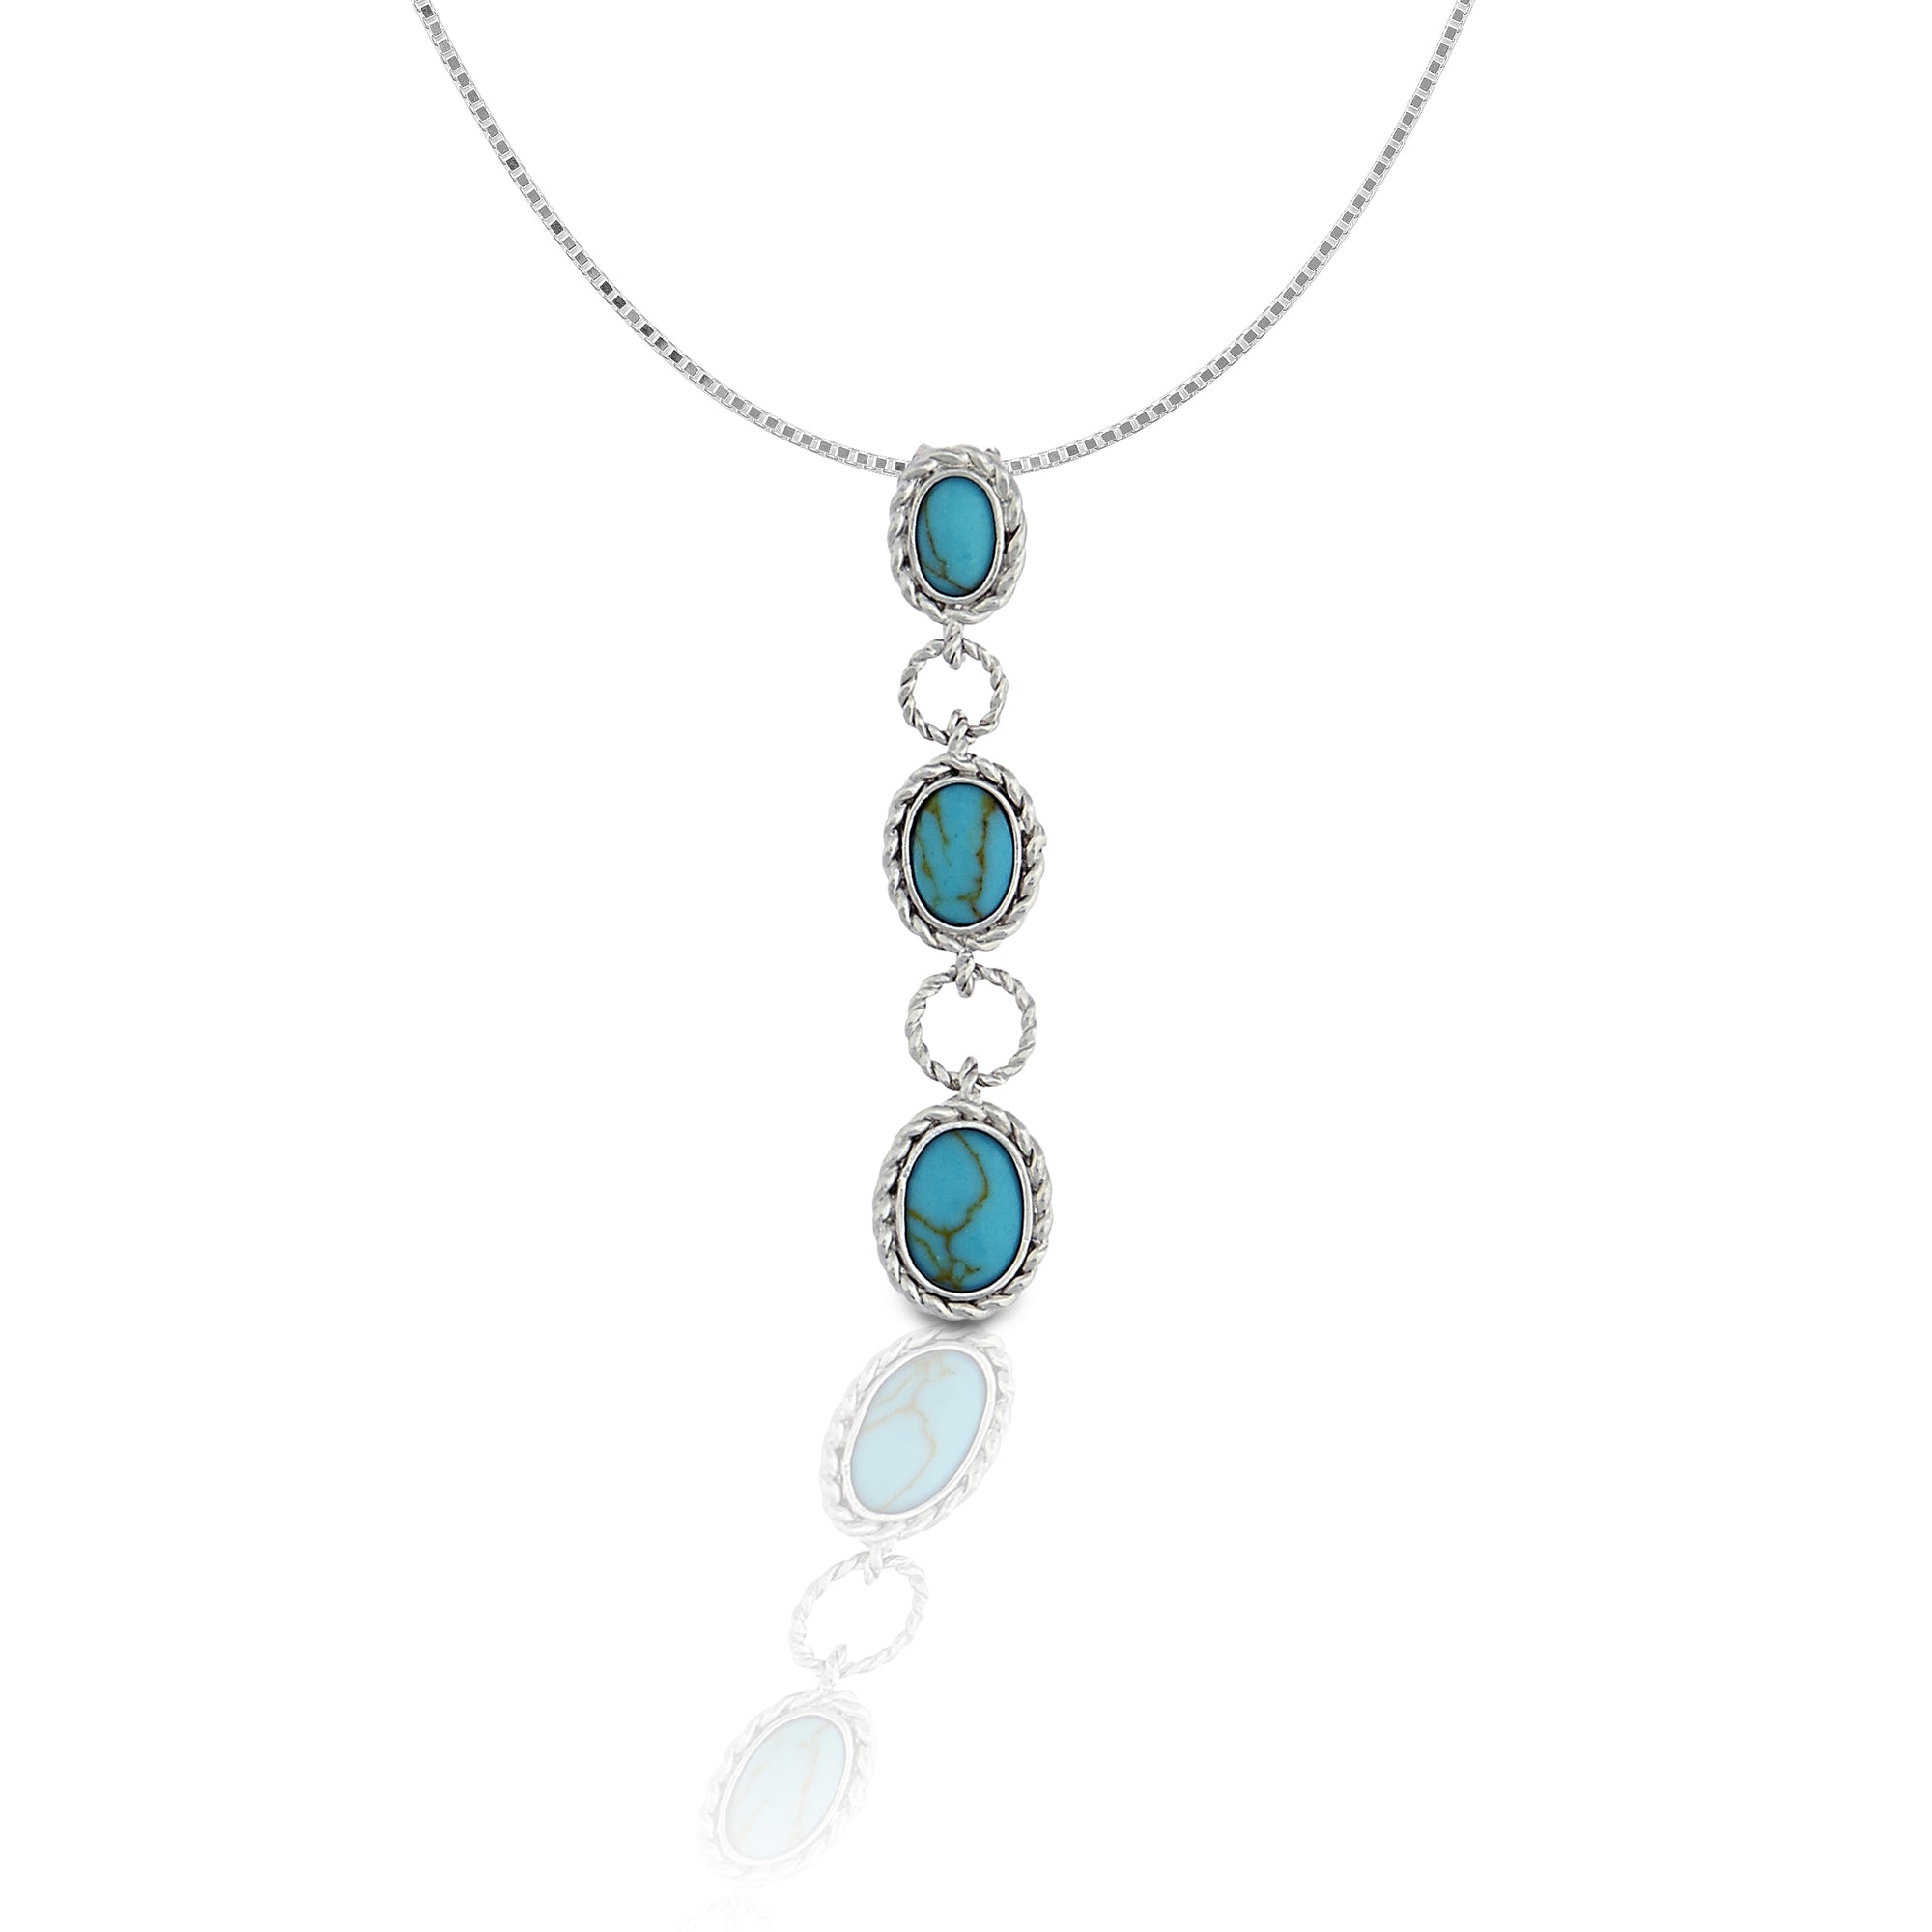     Graduated Cabochon Design     Lab Turquoise Stones     Measures 46mm high x 7mm wide     16"-18" Adjustable Box Chain     Matching Earrings Available     Sterling Silver